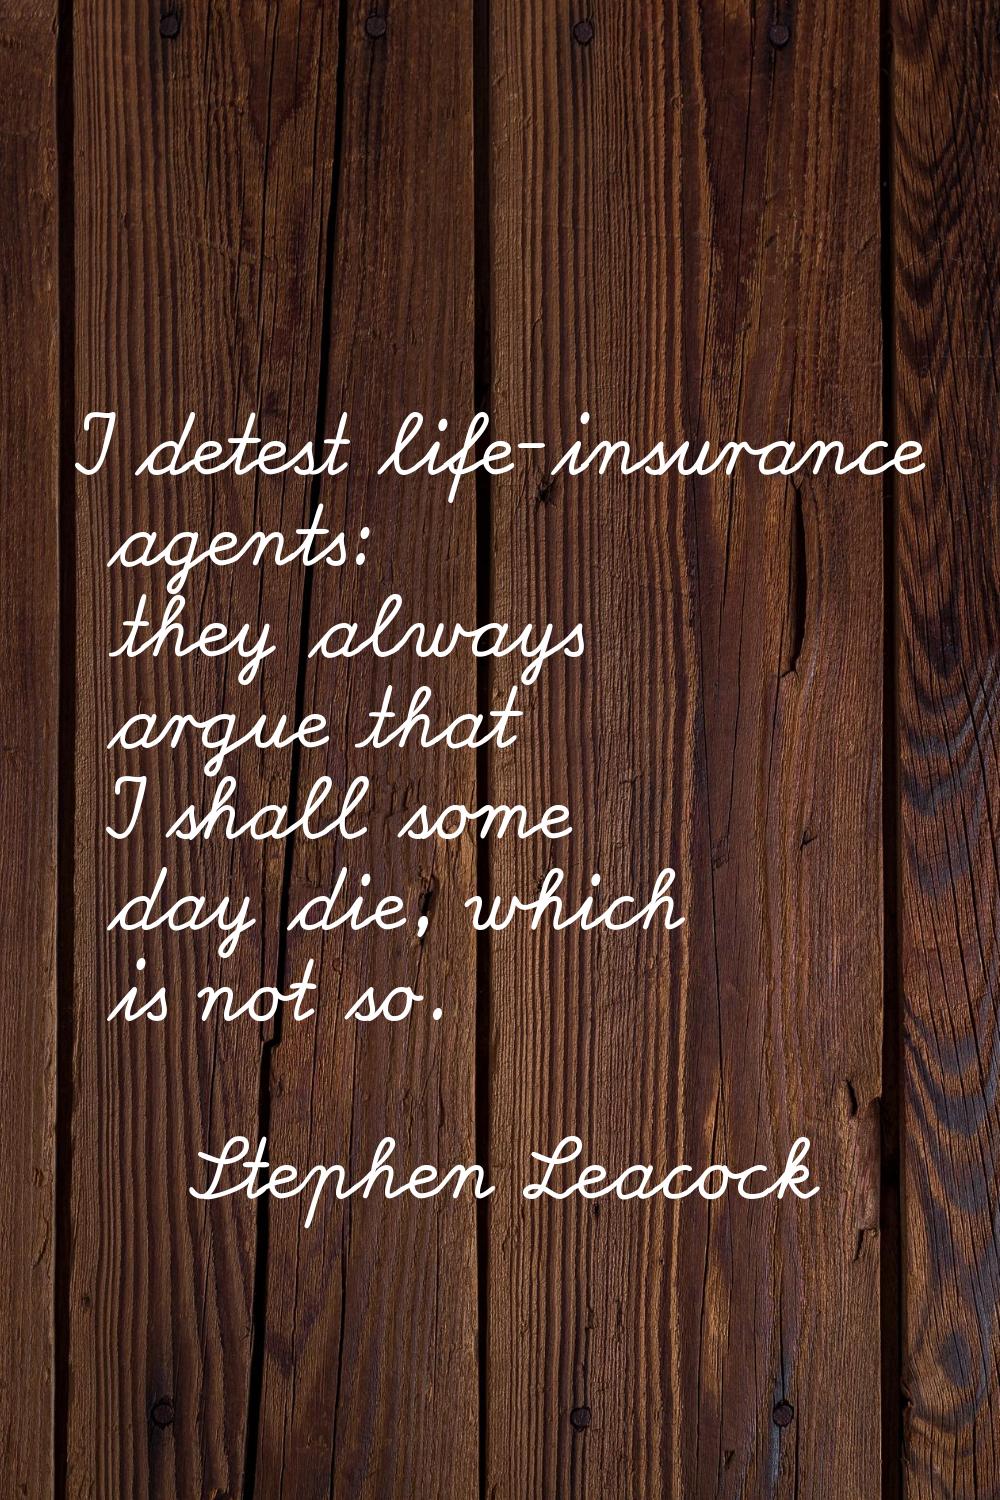 I detest life-insurance agents: they always argue that I shall some day die, which is not so.